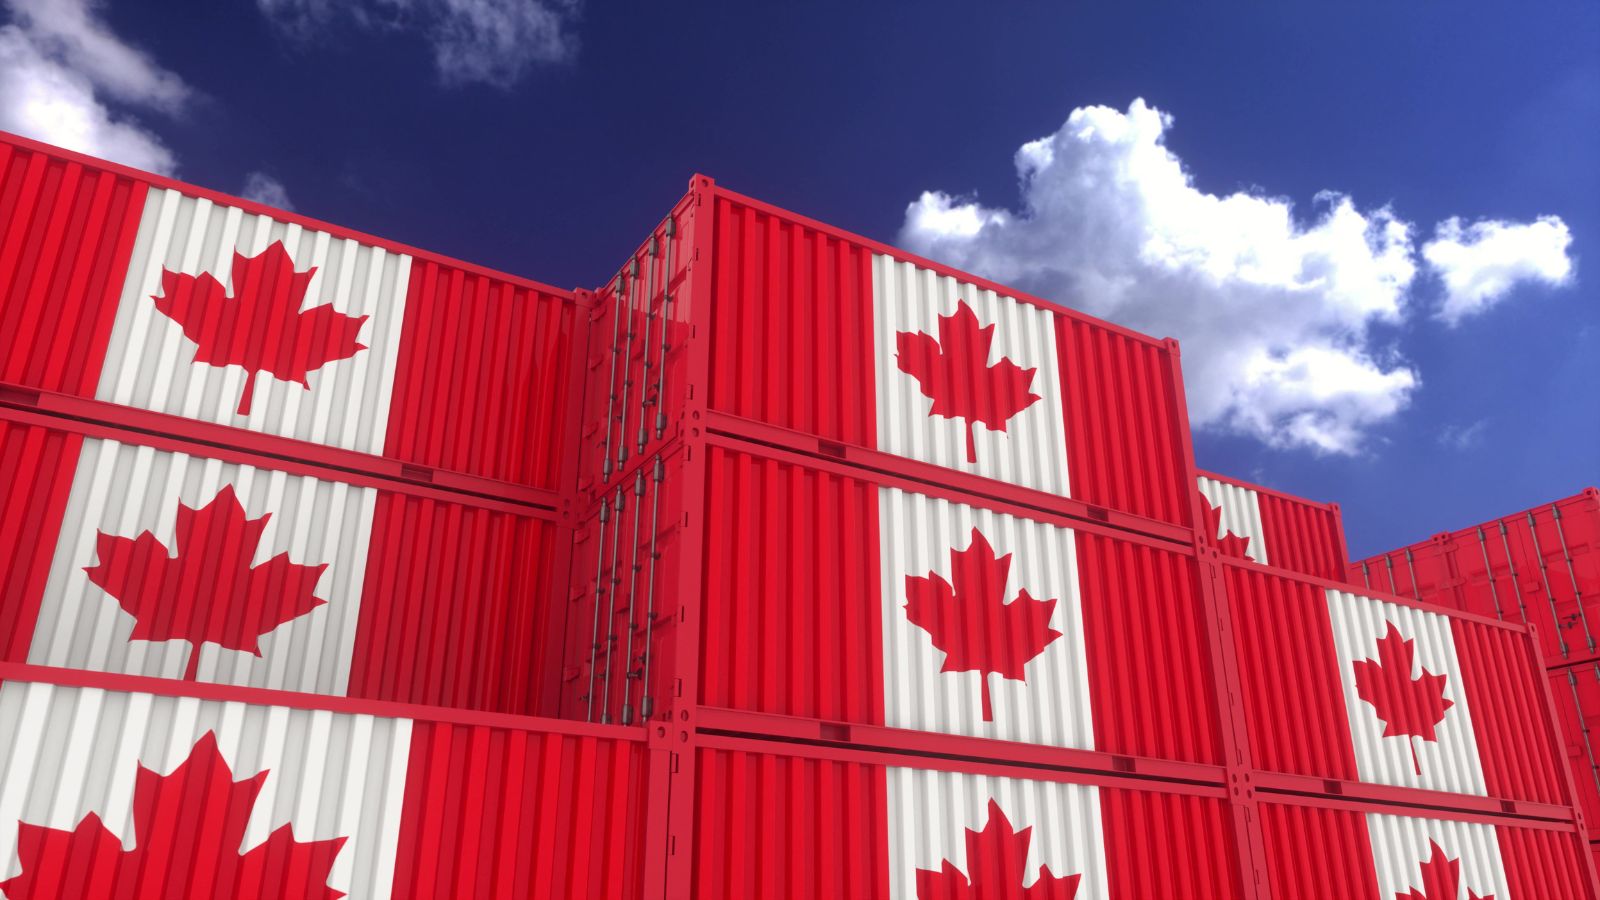 Shipping containers painted with the Canadian national flag